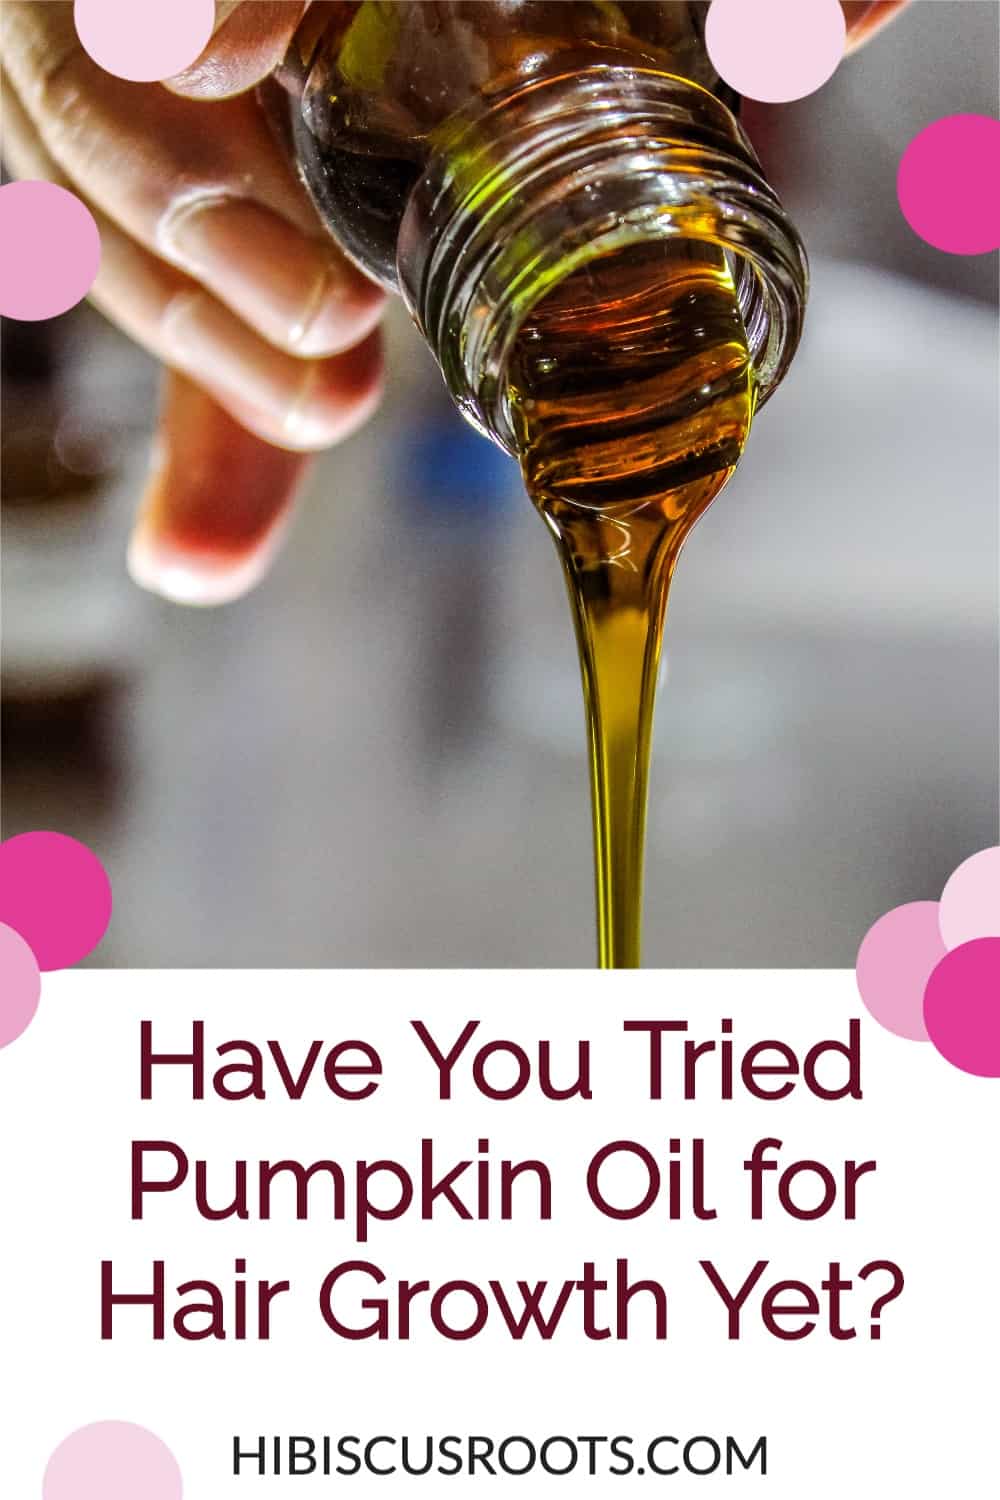 Why Scientists are Saying Pumpkin Oil is the Secret to Fast Hair Growth!